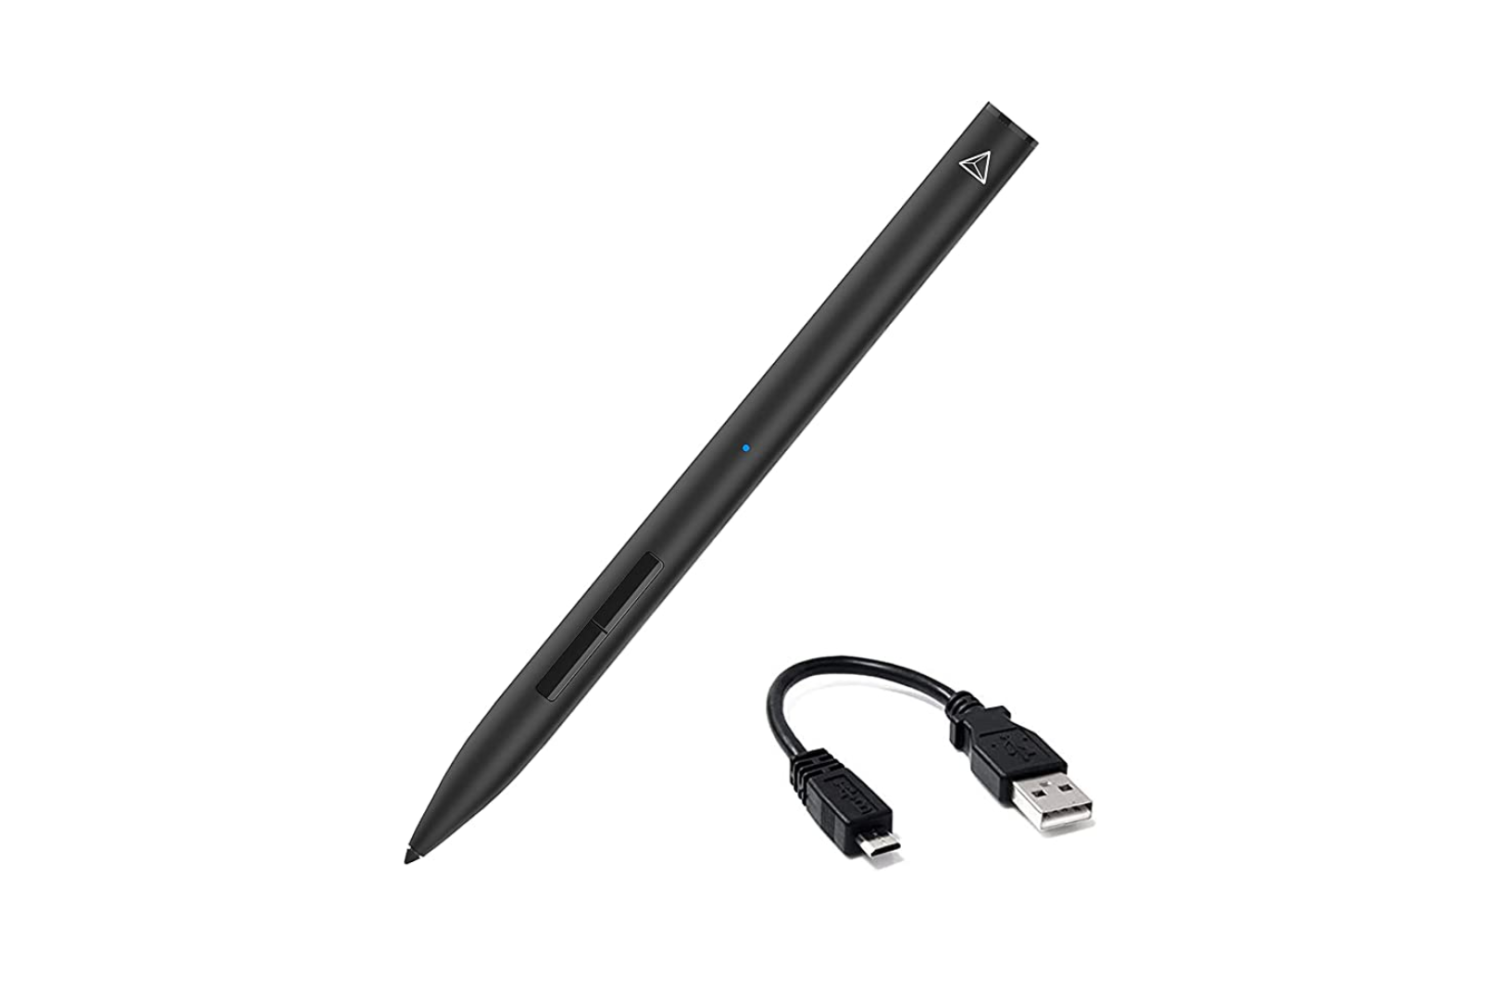 adonit note + stylus for iPad